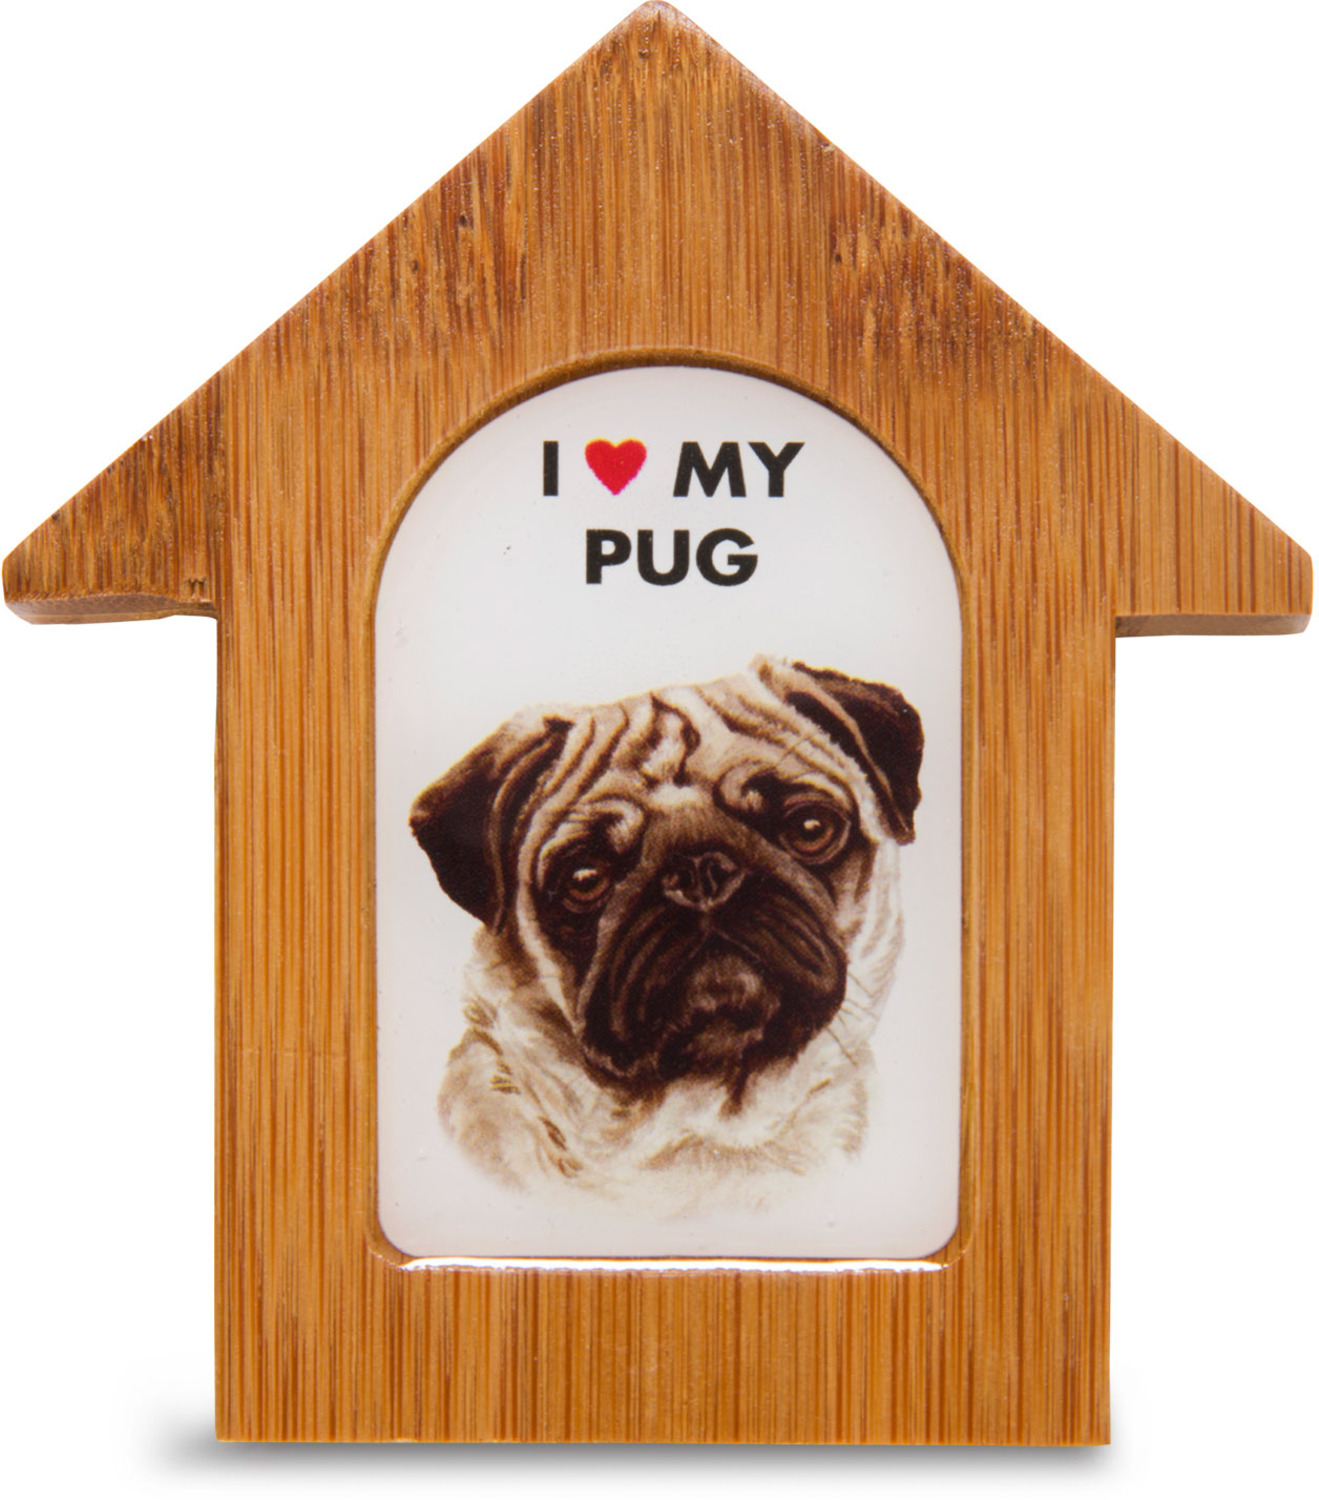 Pug by Waggy Dogz - Pug - 3.5" Self-Standing Magnet